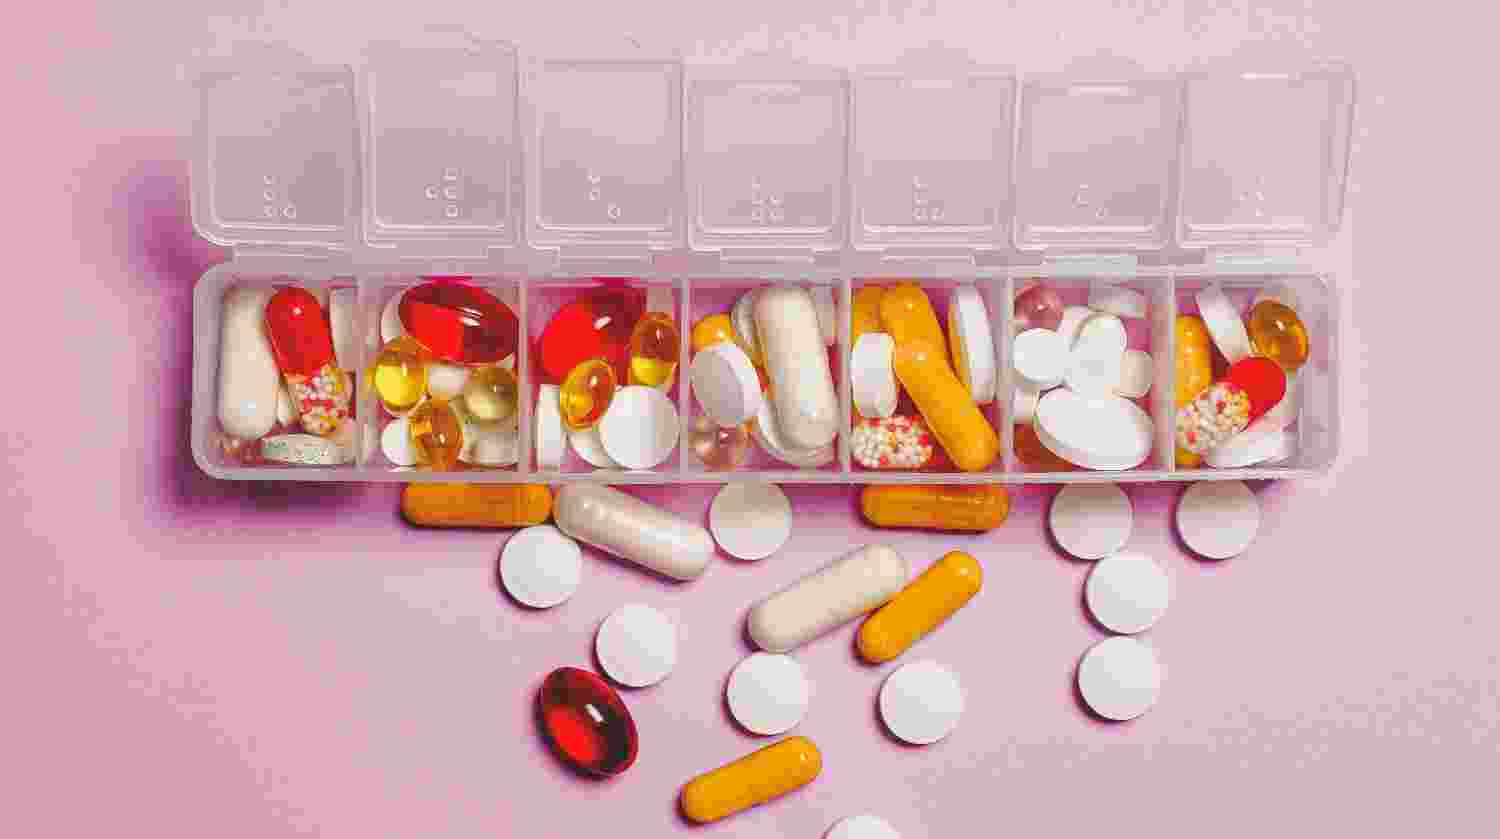 Taking too many medicines is risky: How to avoid it